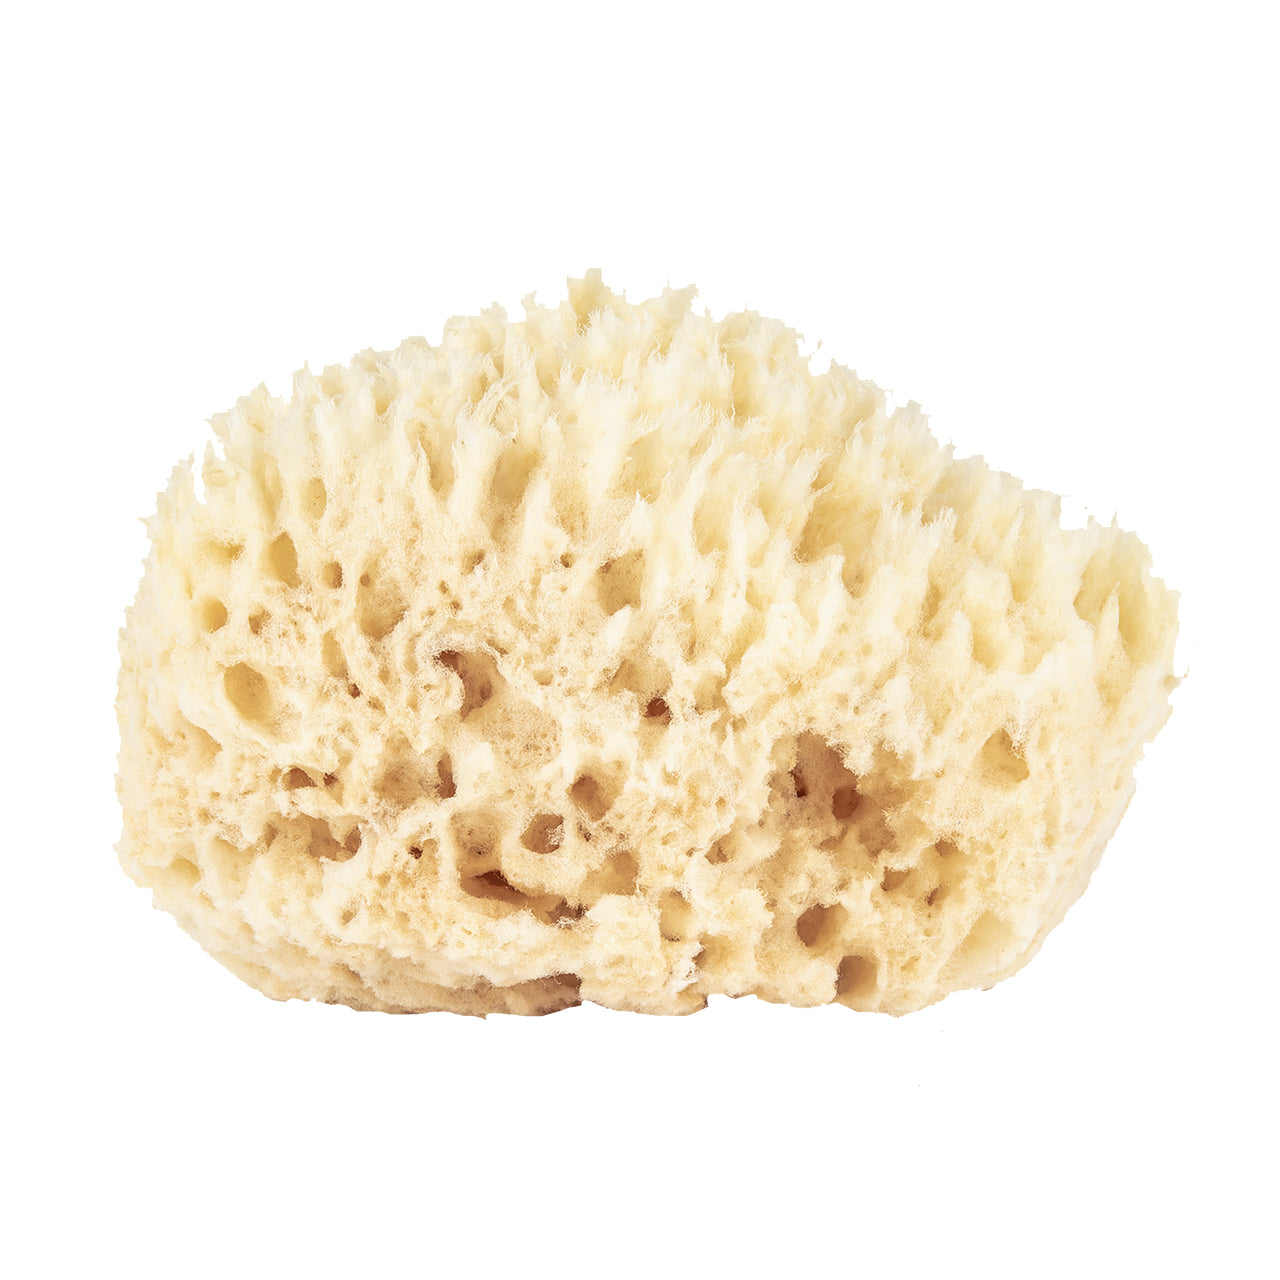 Paradise Goods Natural Yellow Sea Grass Sponge 5 INCHES. Perfect for Bath, Shower and Body Care. Softly Rough But Not Skin Irritating. Lathers & Washes Really Well 5